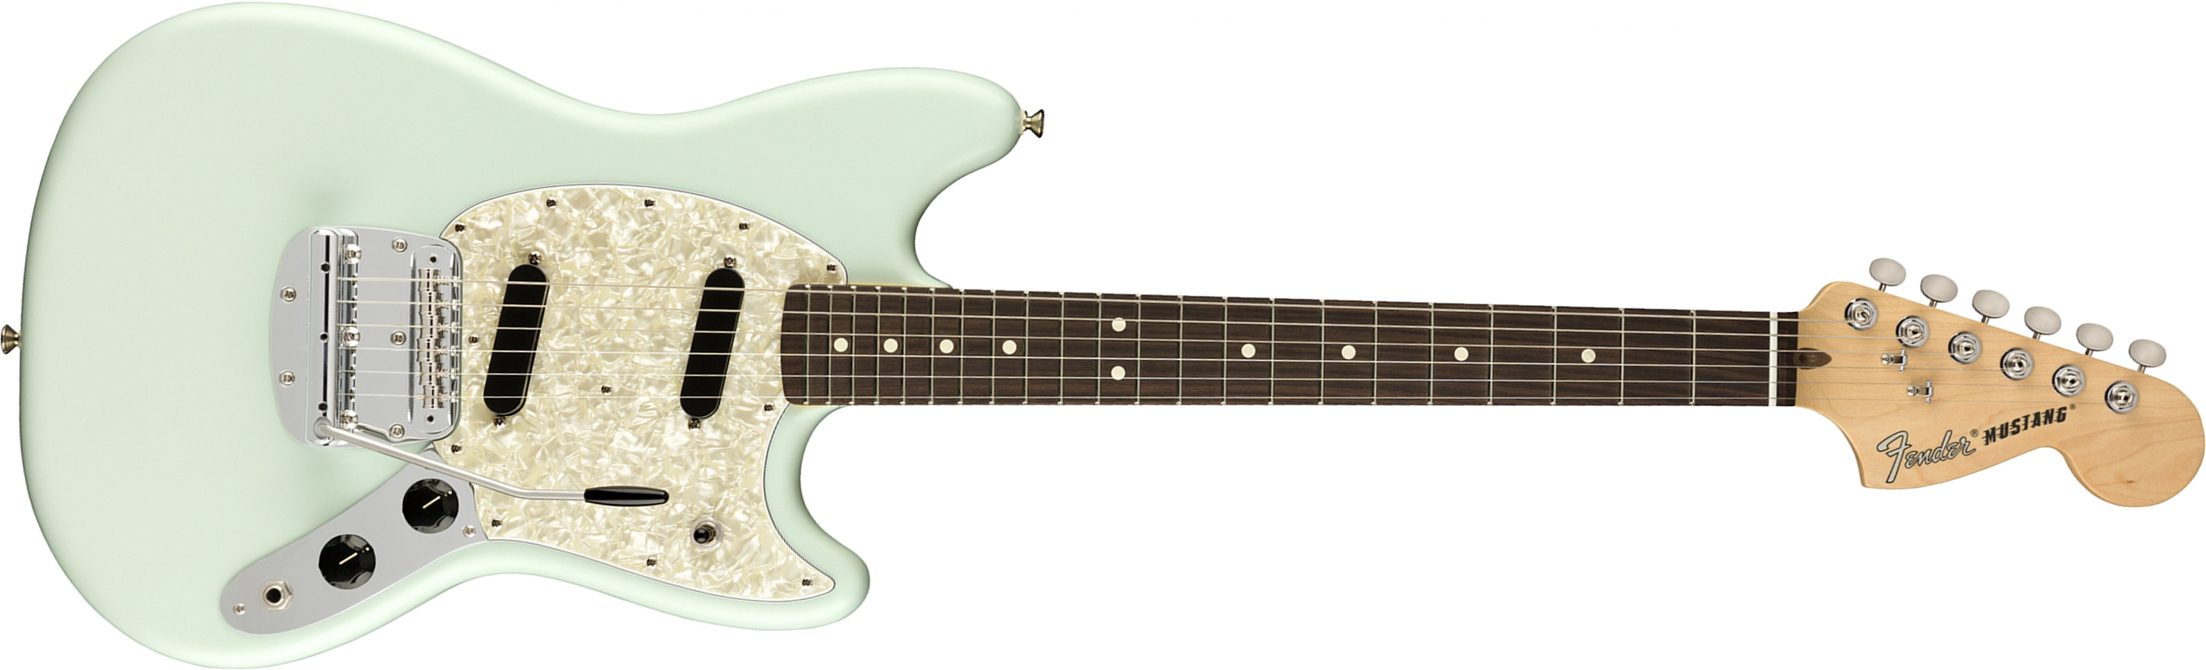 Fender Mustang American Performer Usa Ss Rw - Satin Sonic Blue - Guitare Électrique Double Cut - Main picture